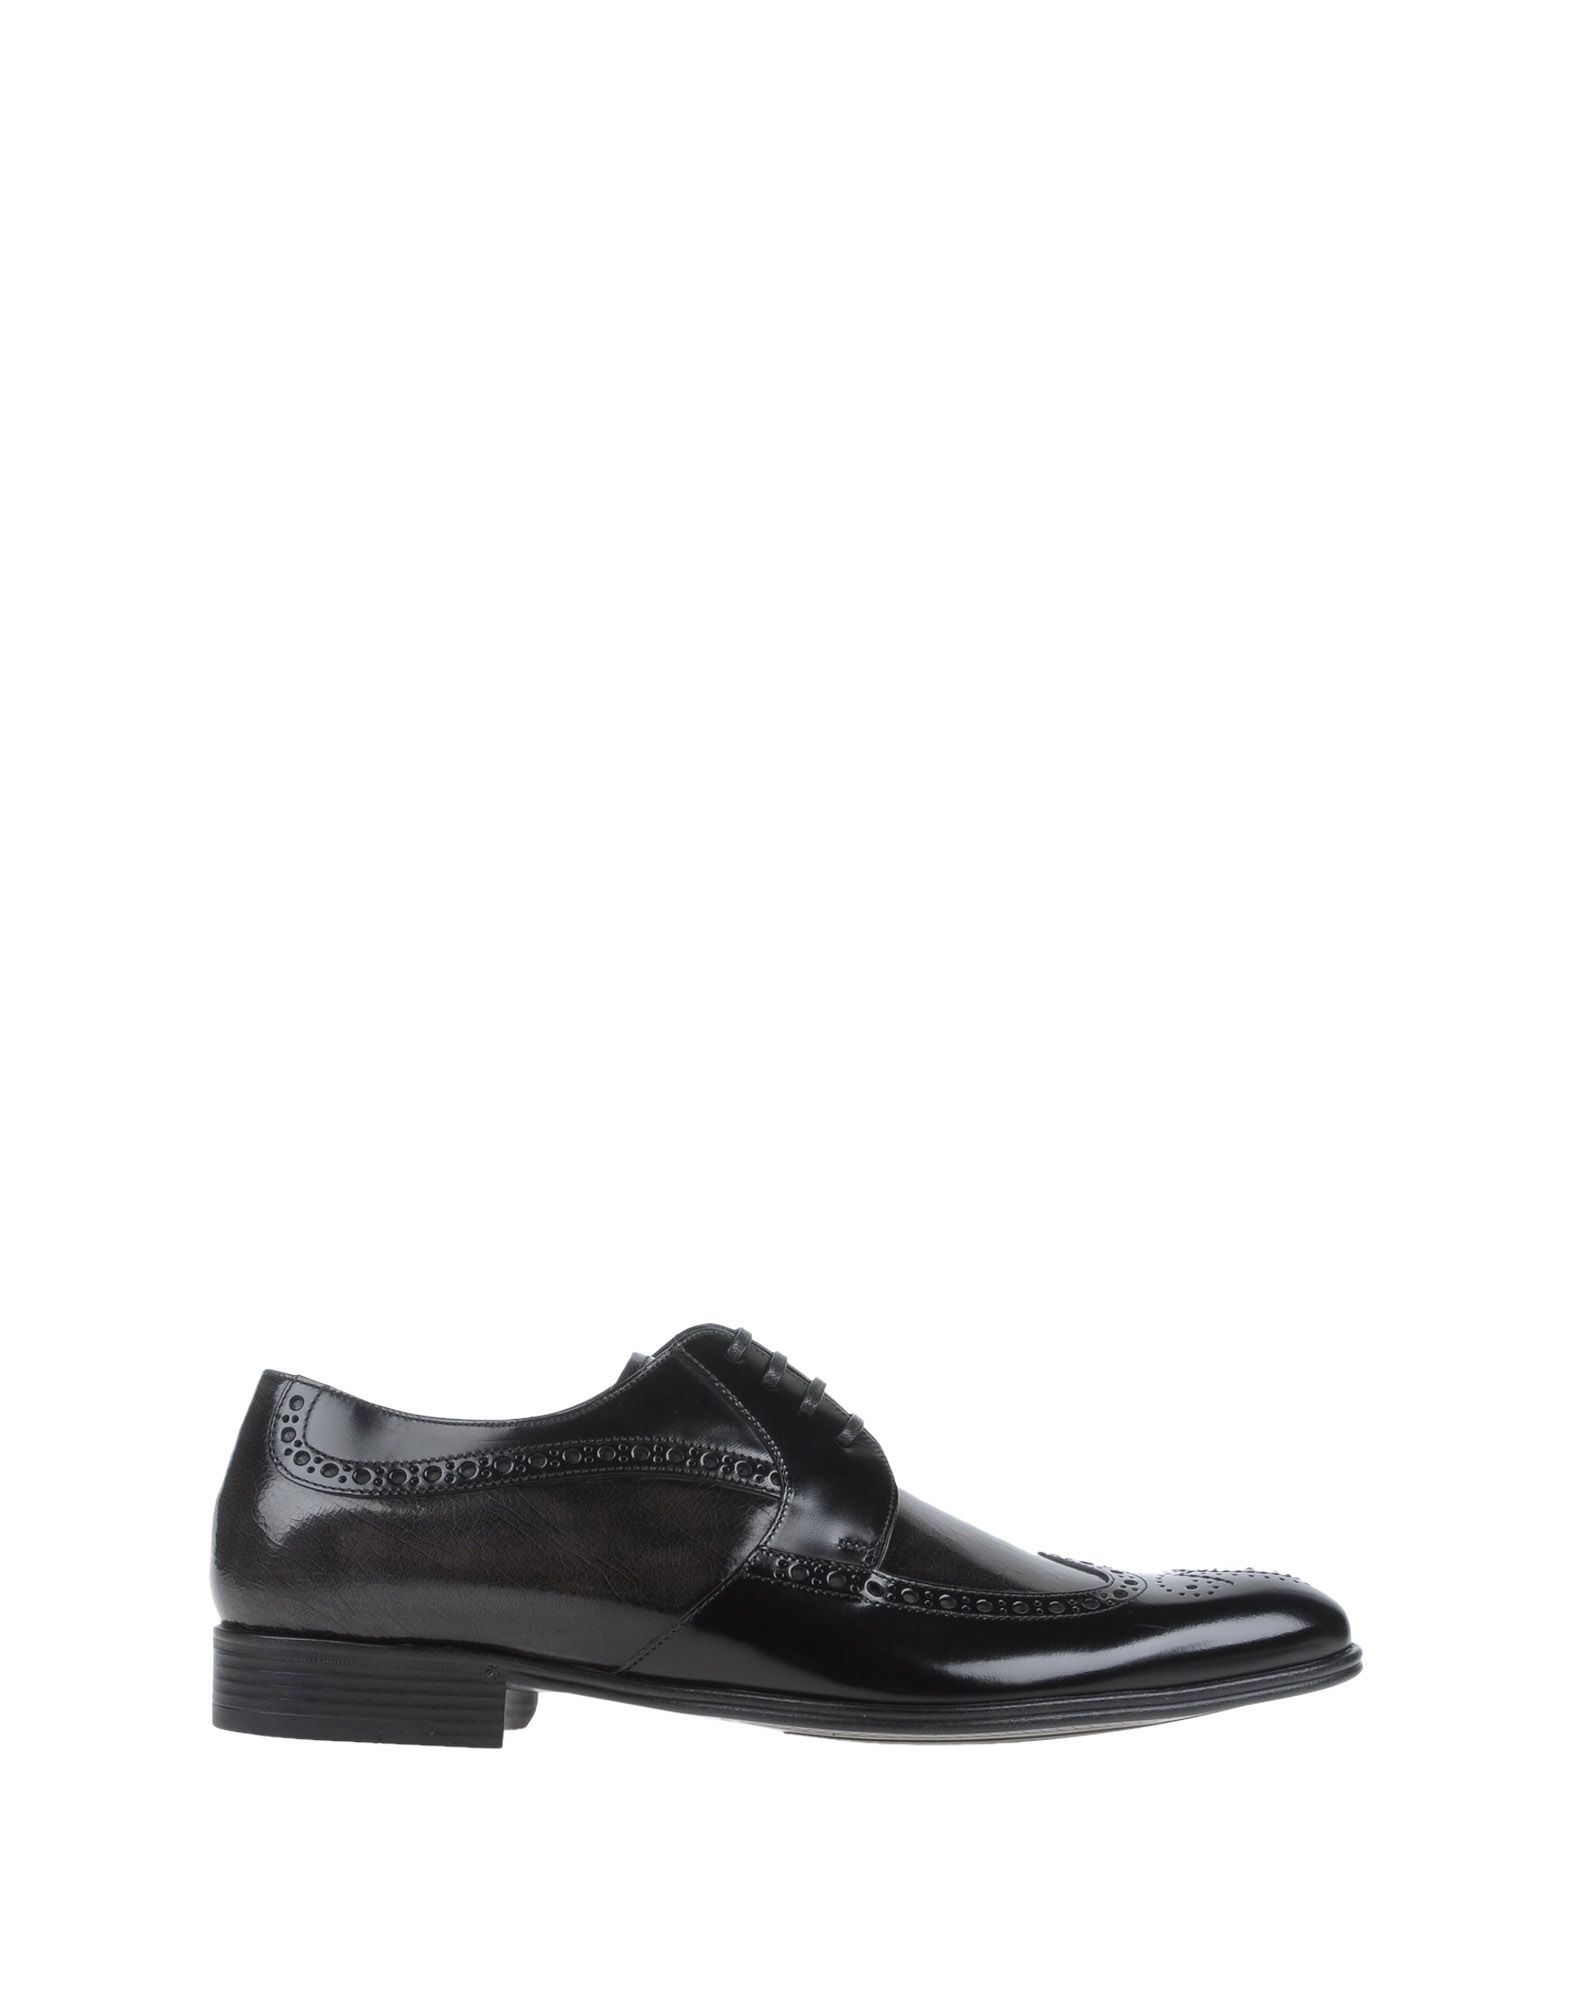 Dolce & Gabbana Leather Lace-up Shoe in Steel Grey (Black) for Men - Lyst